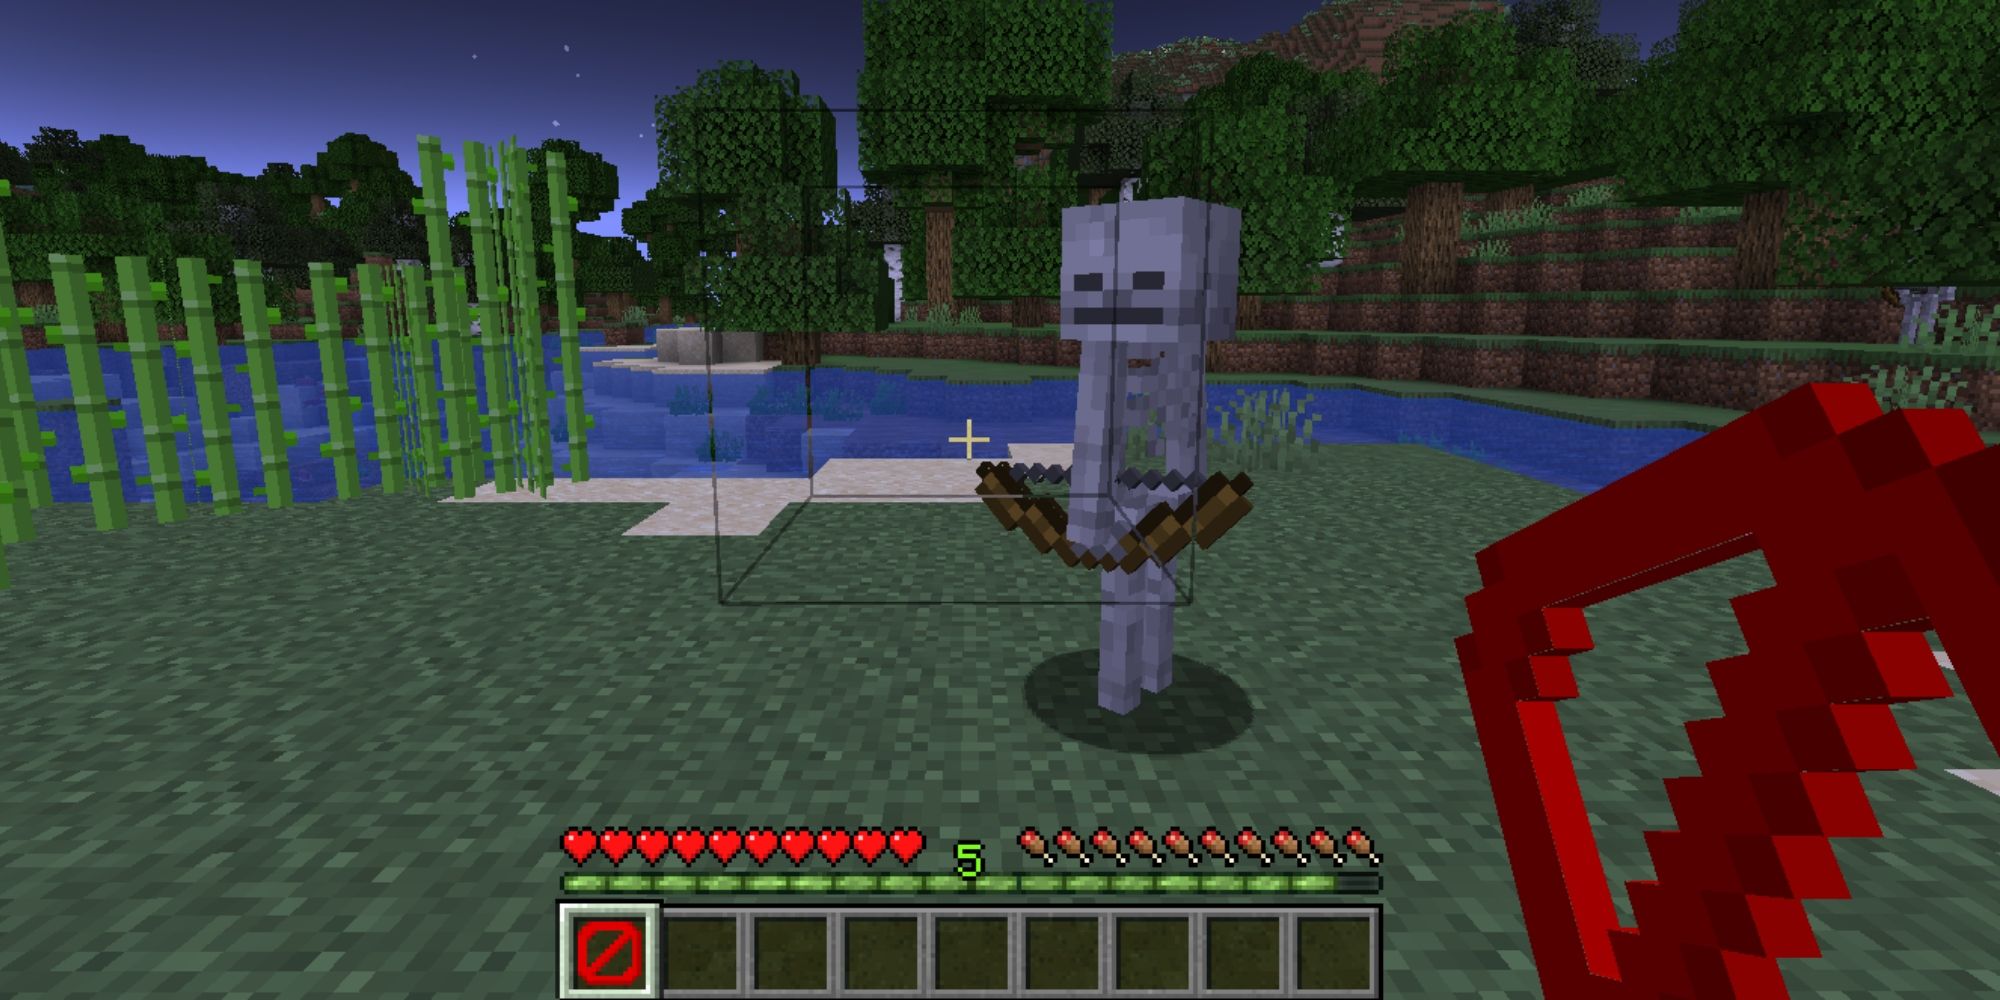 Minecraft Skeleton seen through invisble blocks, not attacking the player despite being in survival